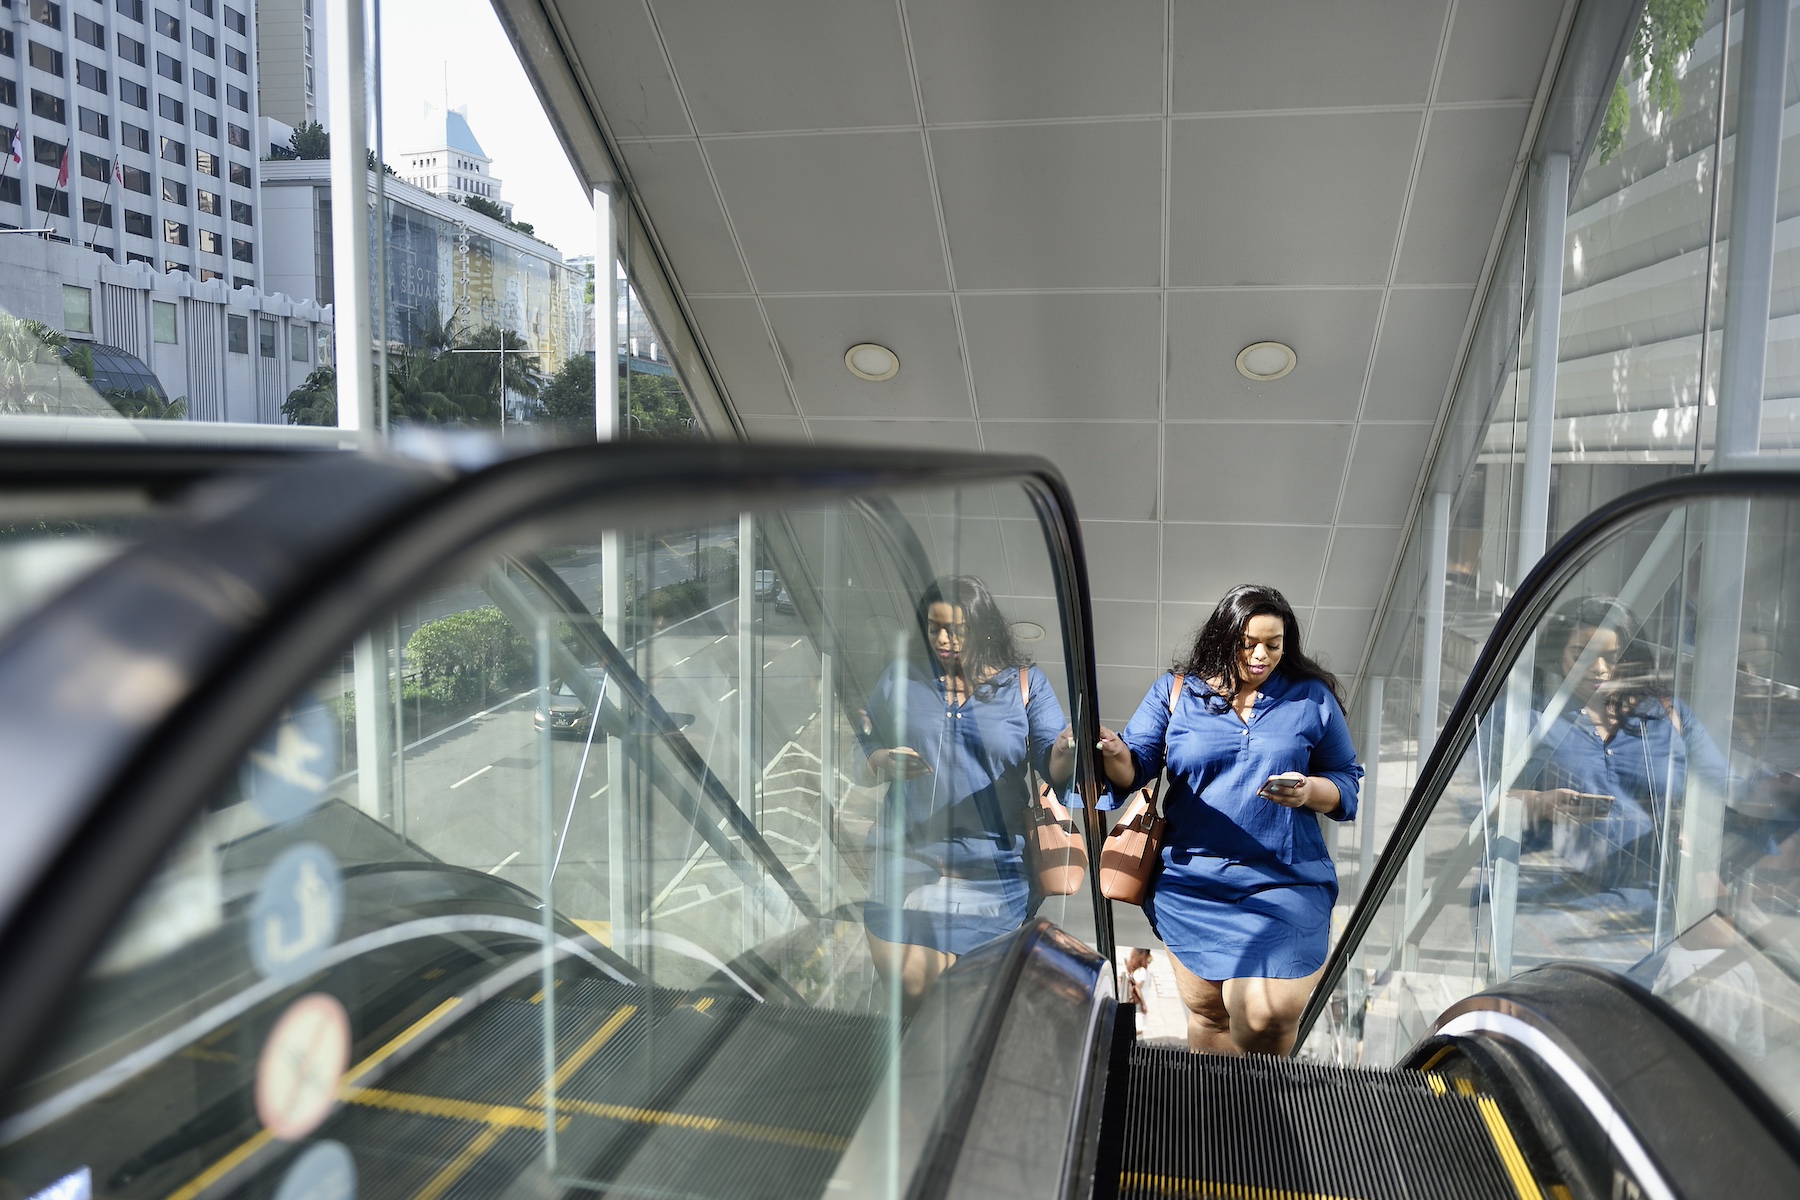 A woman rides the escalator to her office while checking her mobile banking app